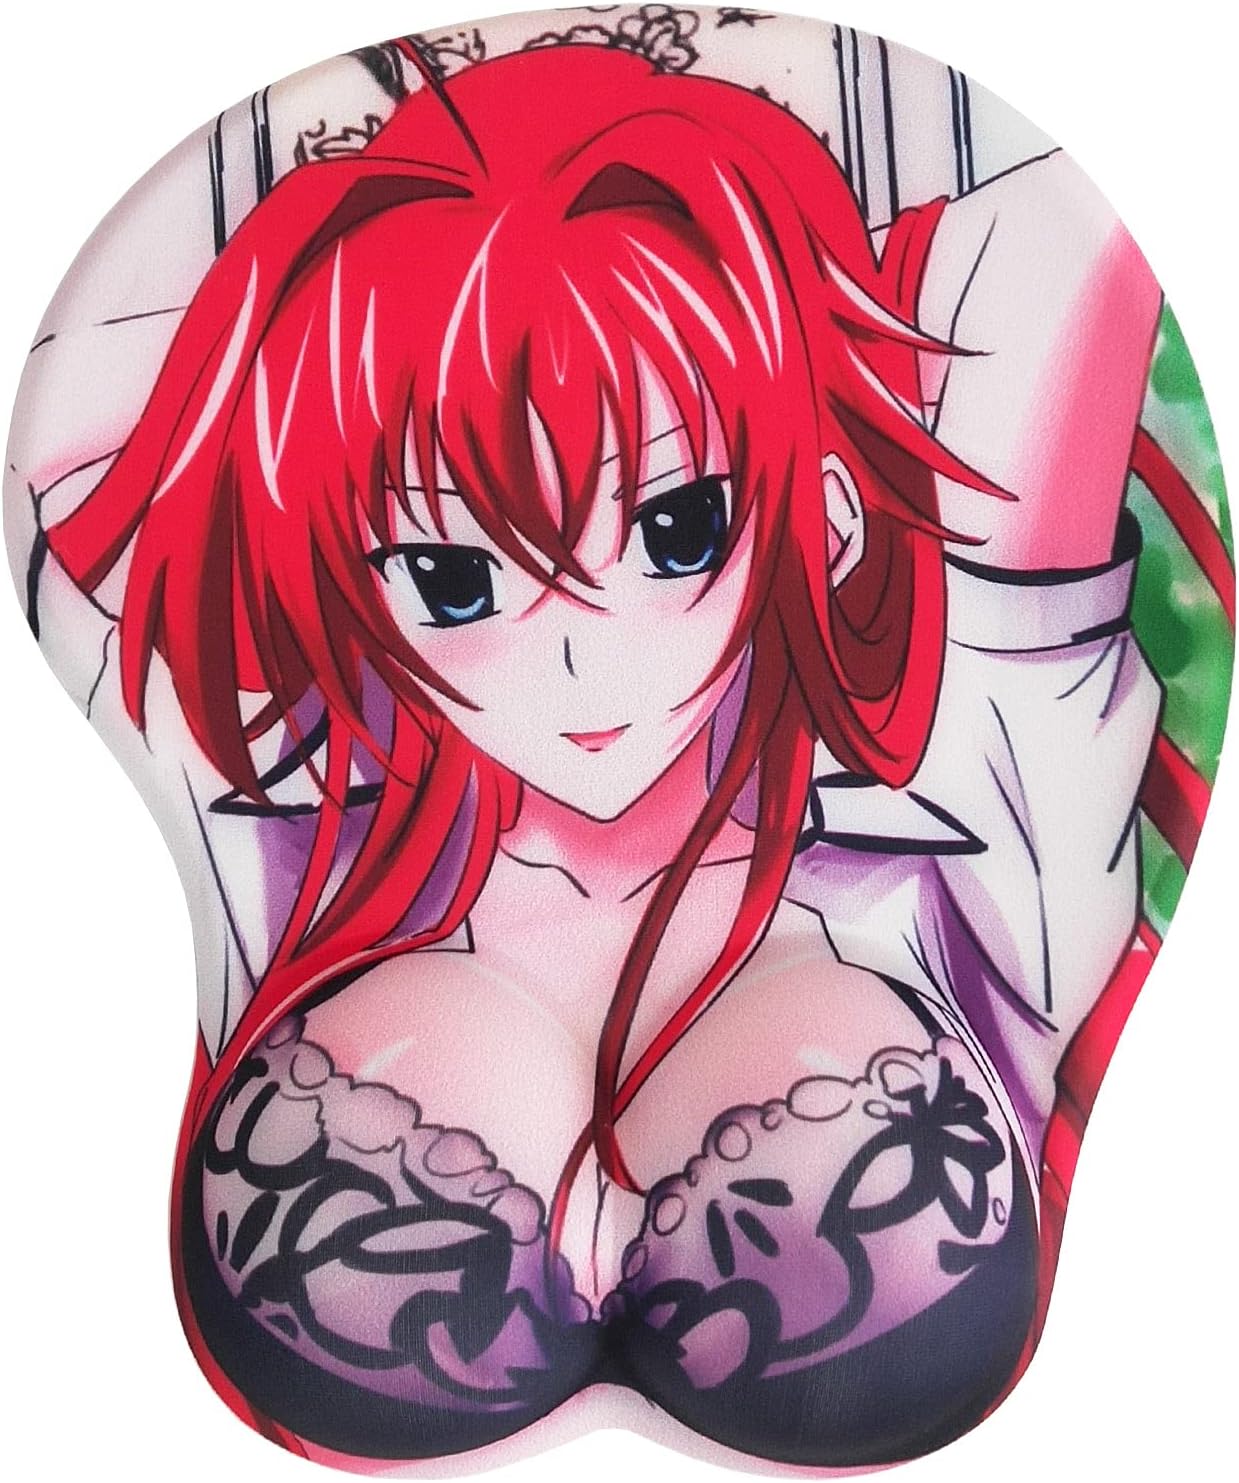 BETOMSPS Comfortable Mouse Pad Gaming Mouse Mat Cute Computer Mouse Pad with Wrist Support Anime Red, Funny Mouse Pads for Work